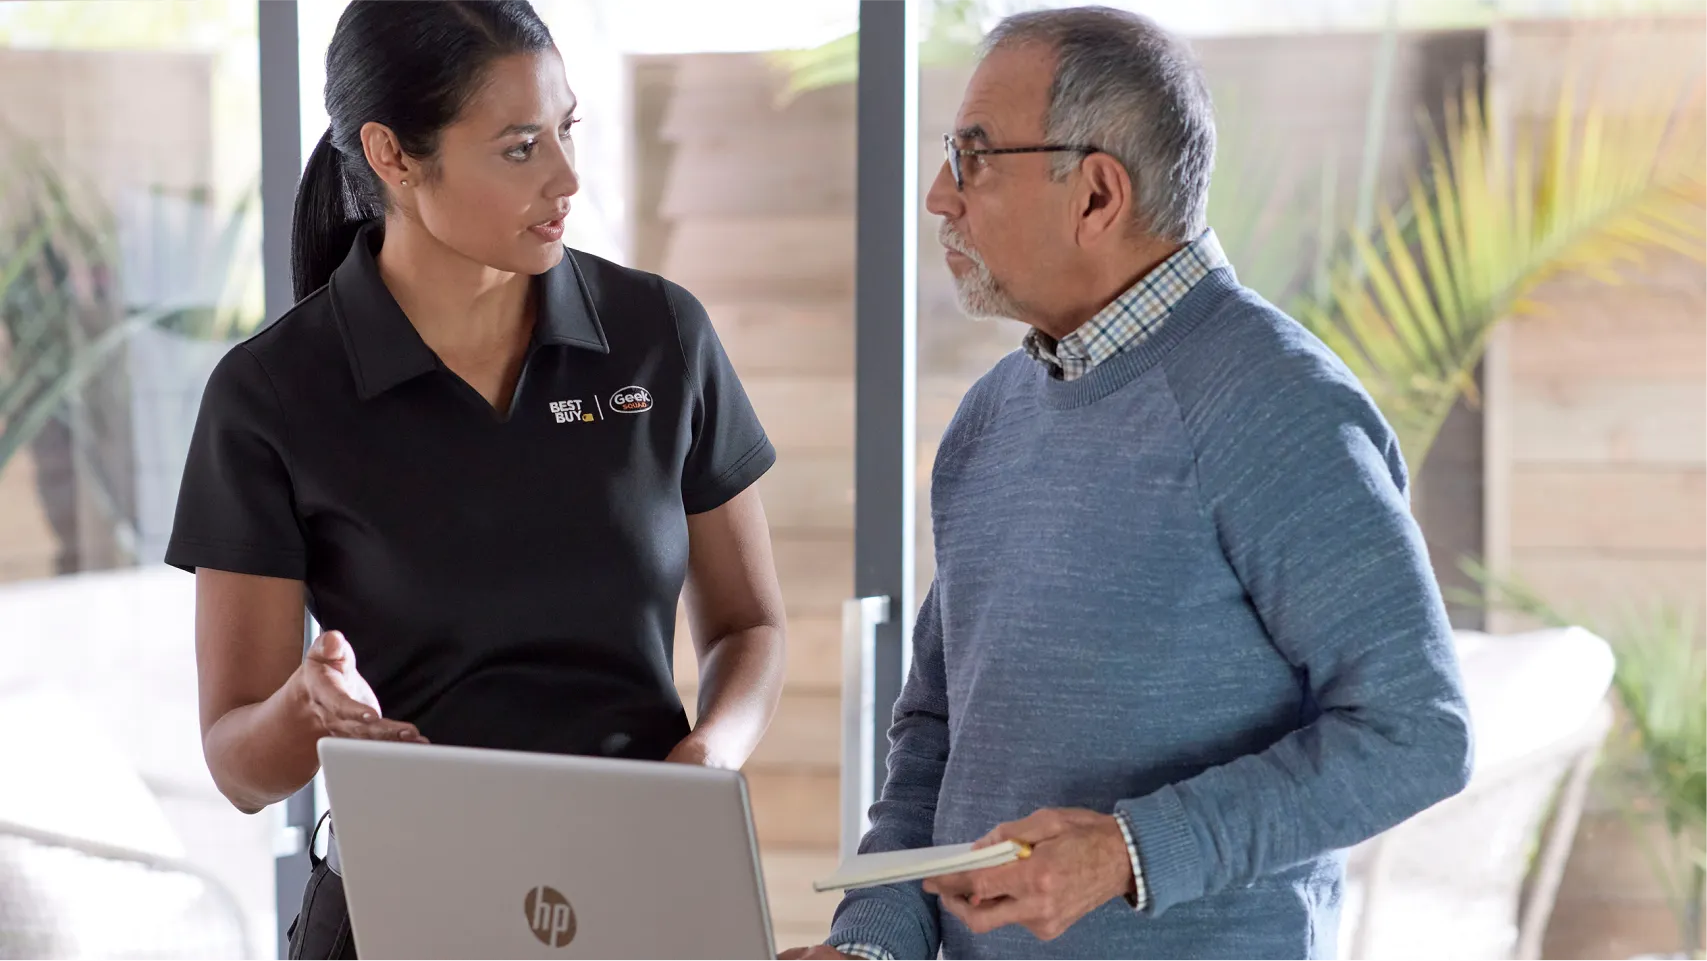 A Geek Squad agent assists an elderly customer with an HP computer in his home.